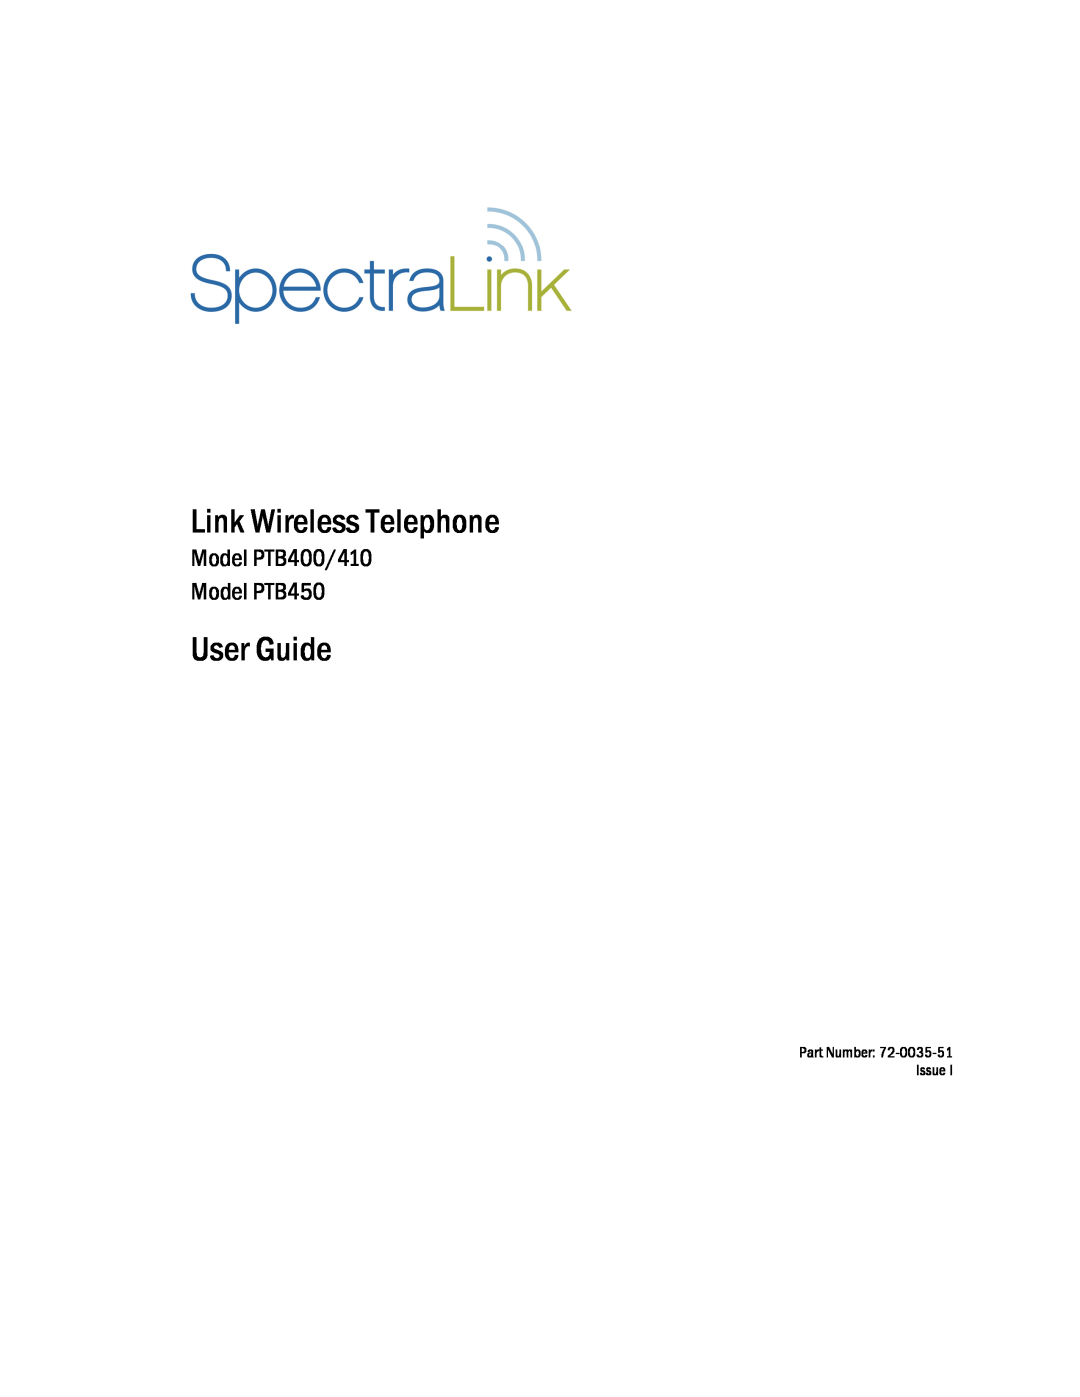 SpectraLink manual Link Wireless Telephone, User Guide, Model PTB400/410 Model PTB450, Part Number Issue 